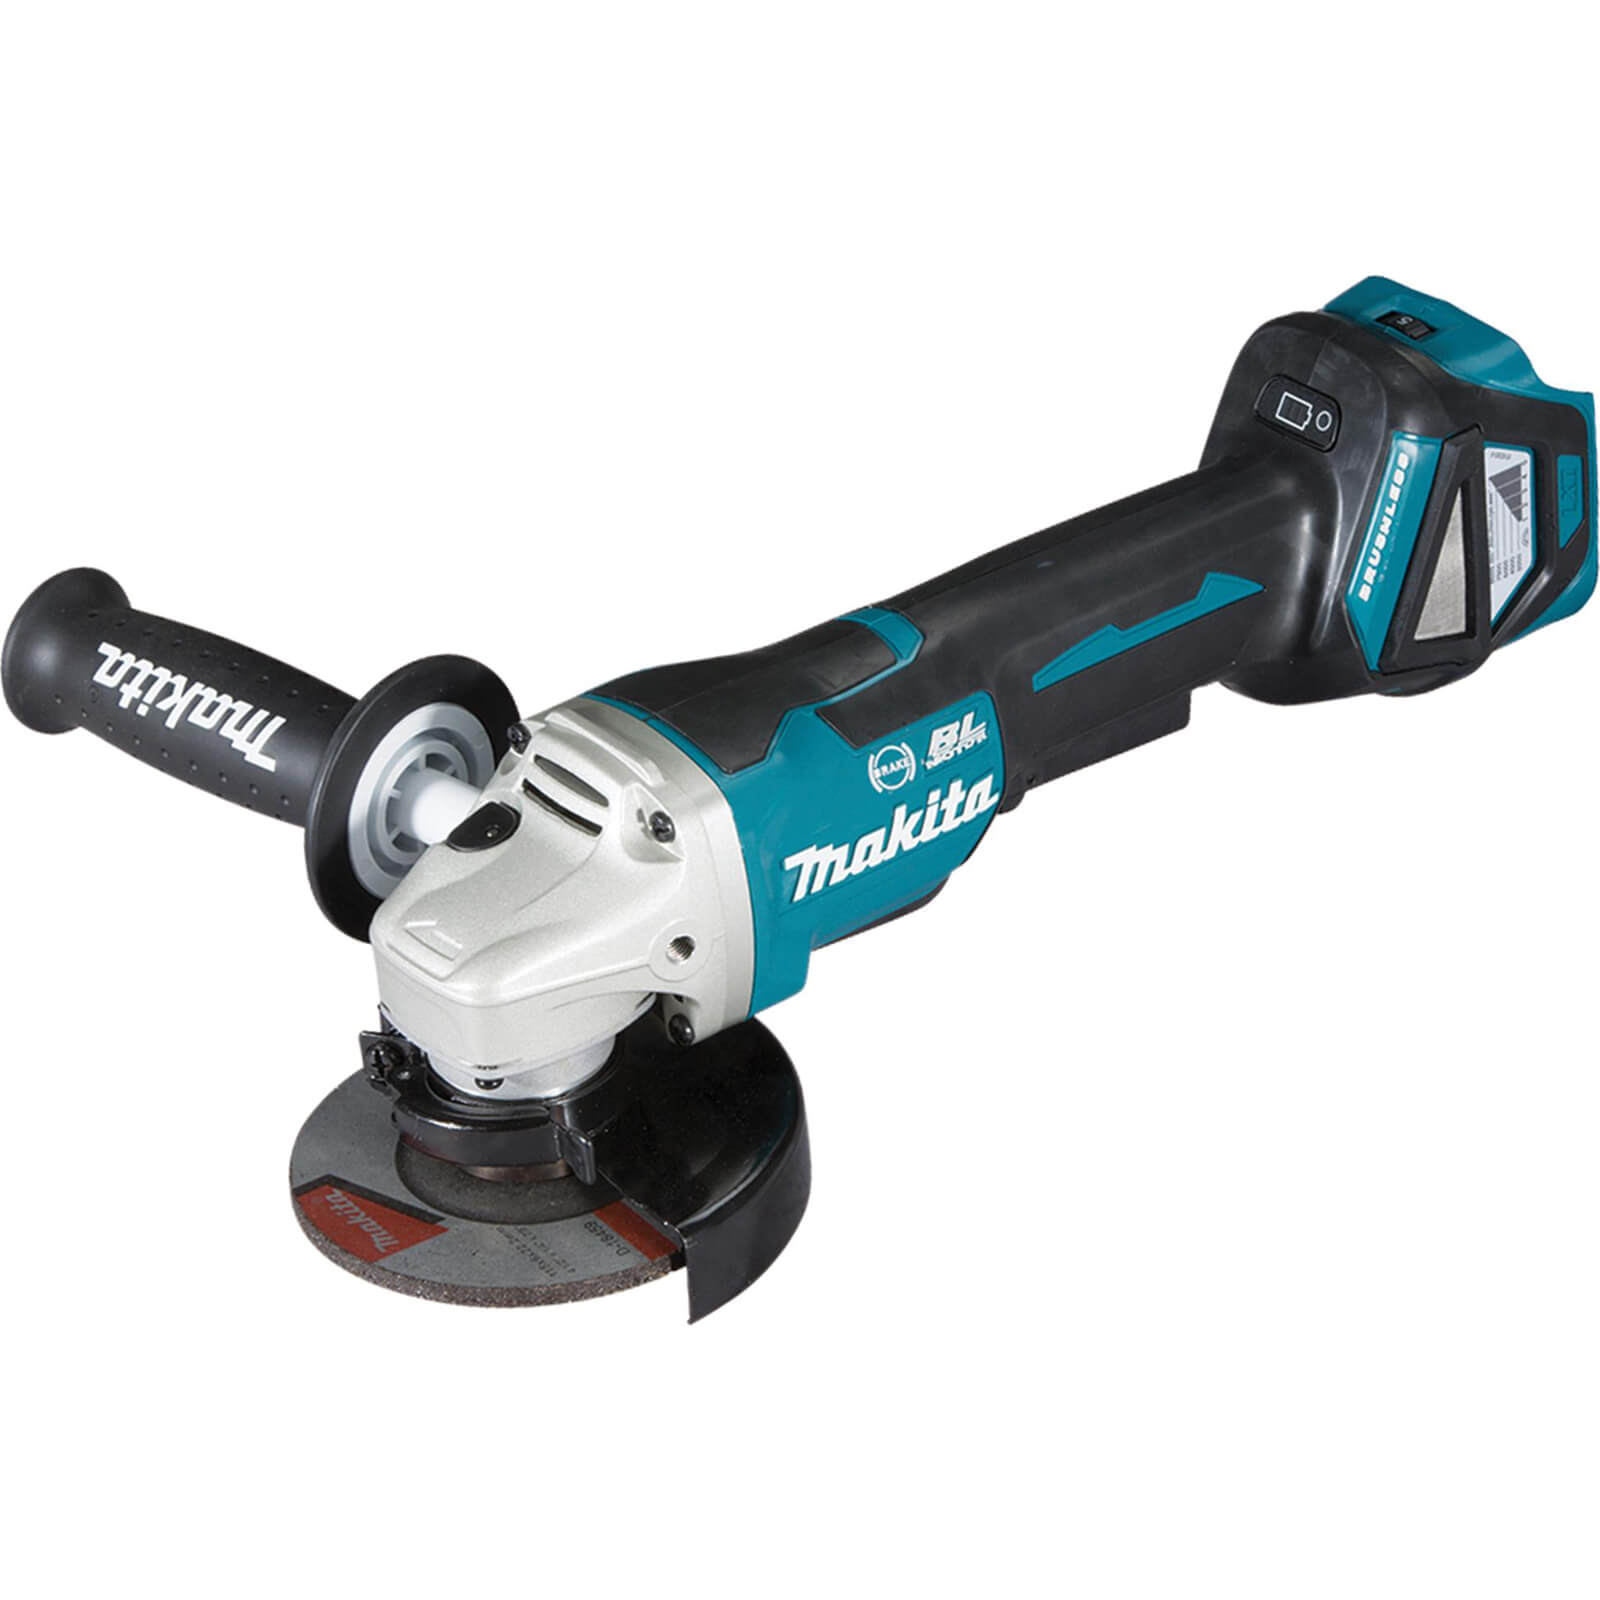 Makita DGA467 18v LXT Cordless Brushless Paddle Switch Angle Grinder 115mm No Batteries No Charger No Case